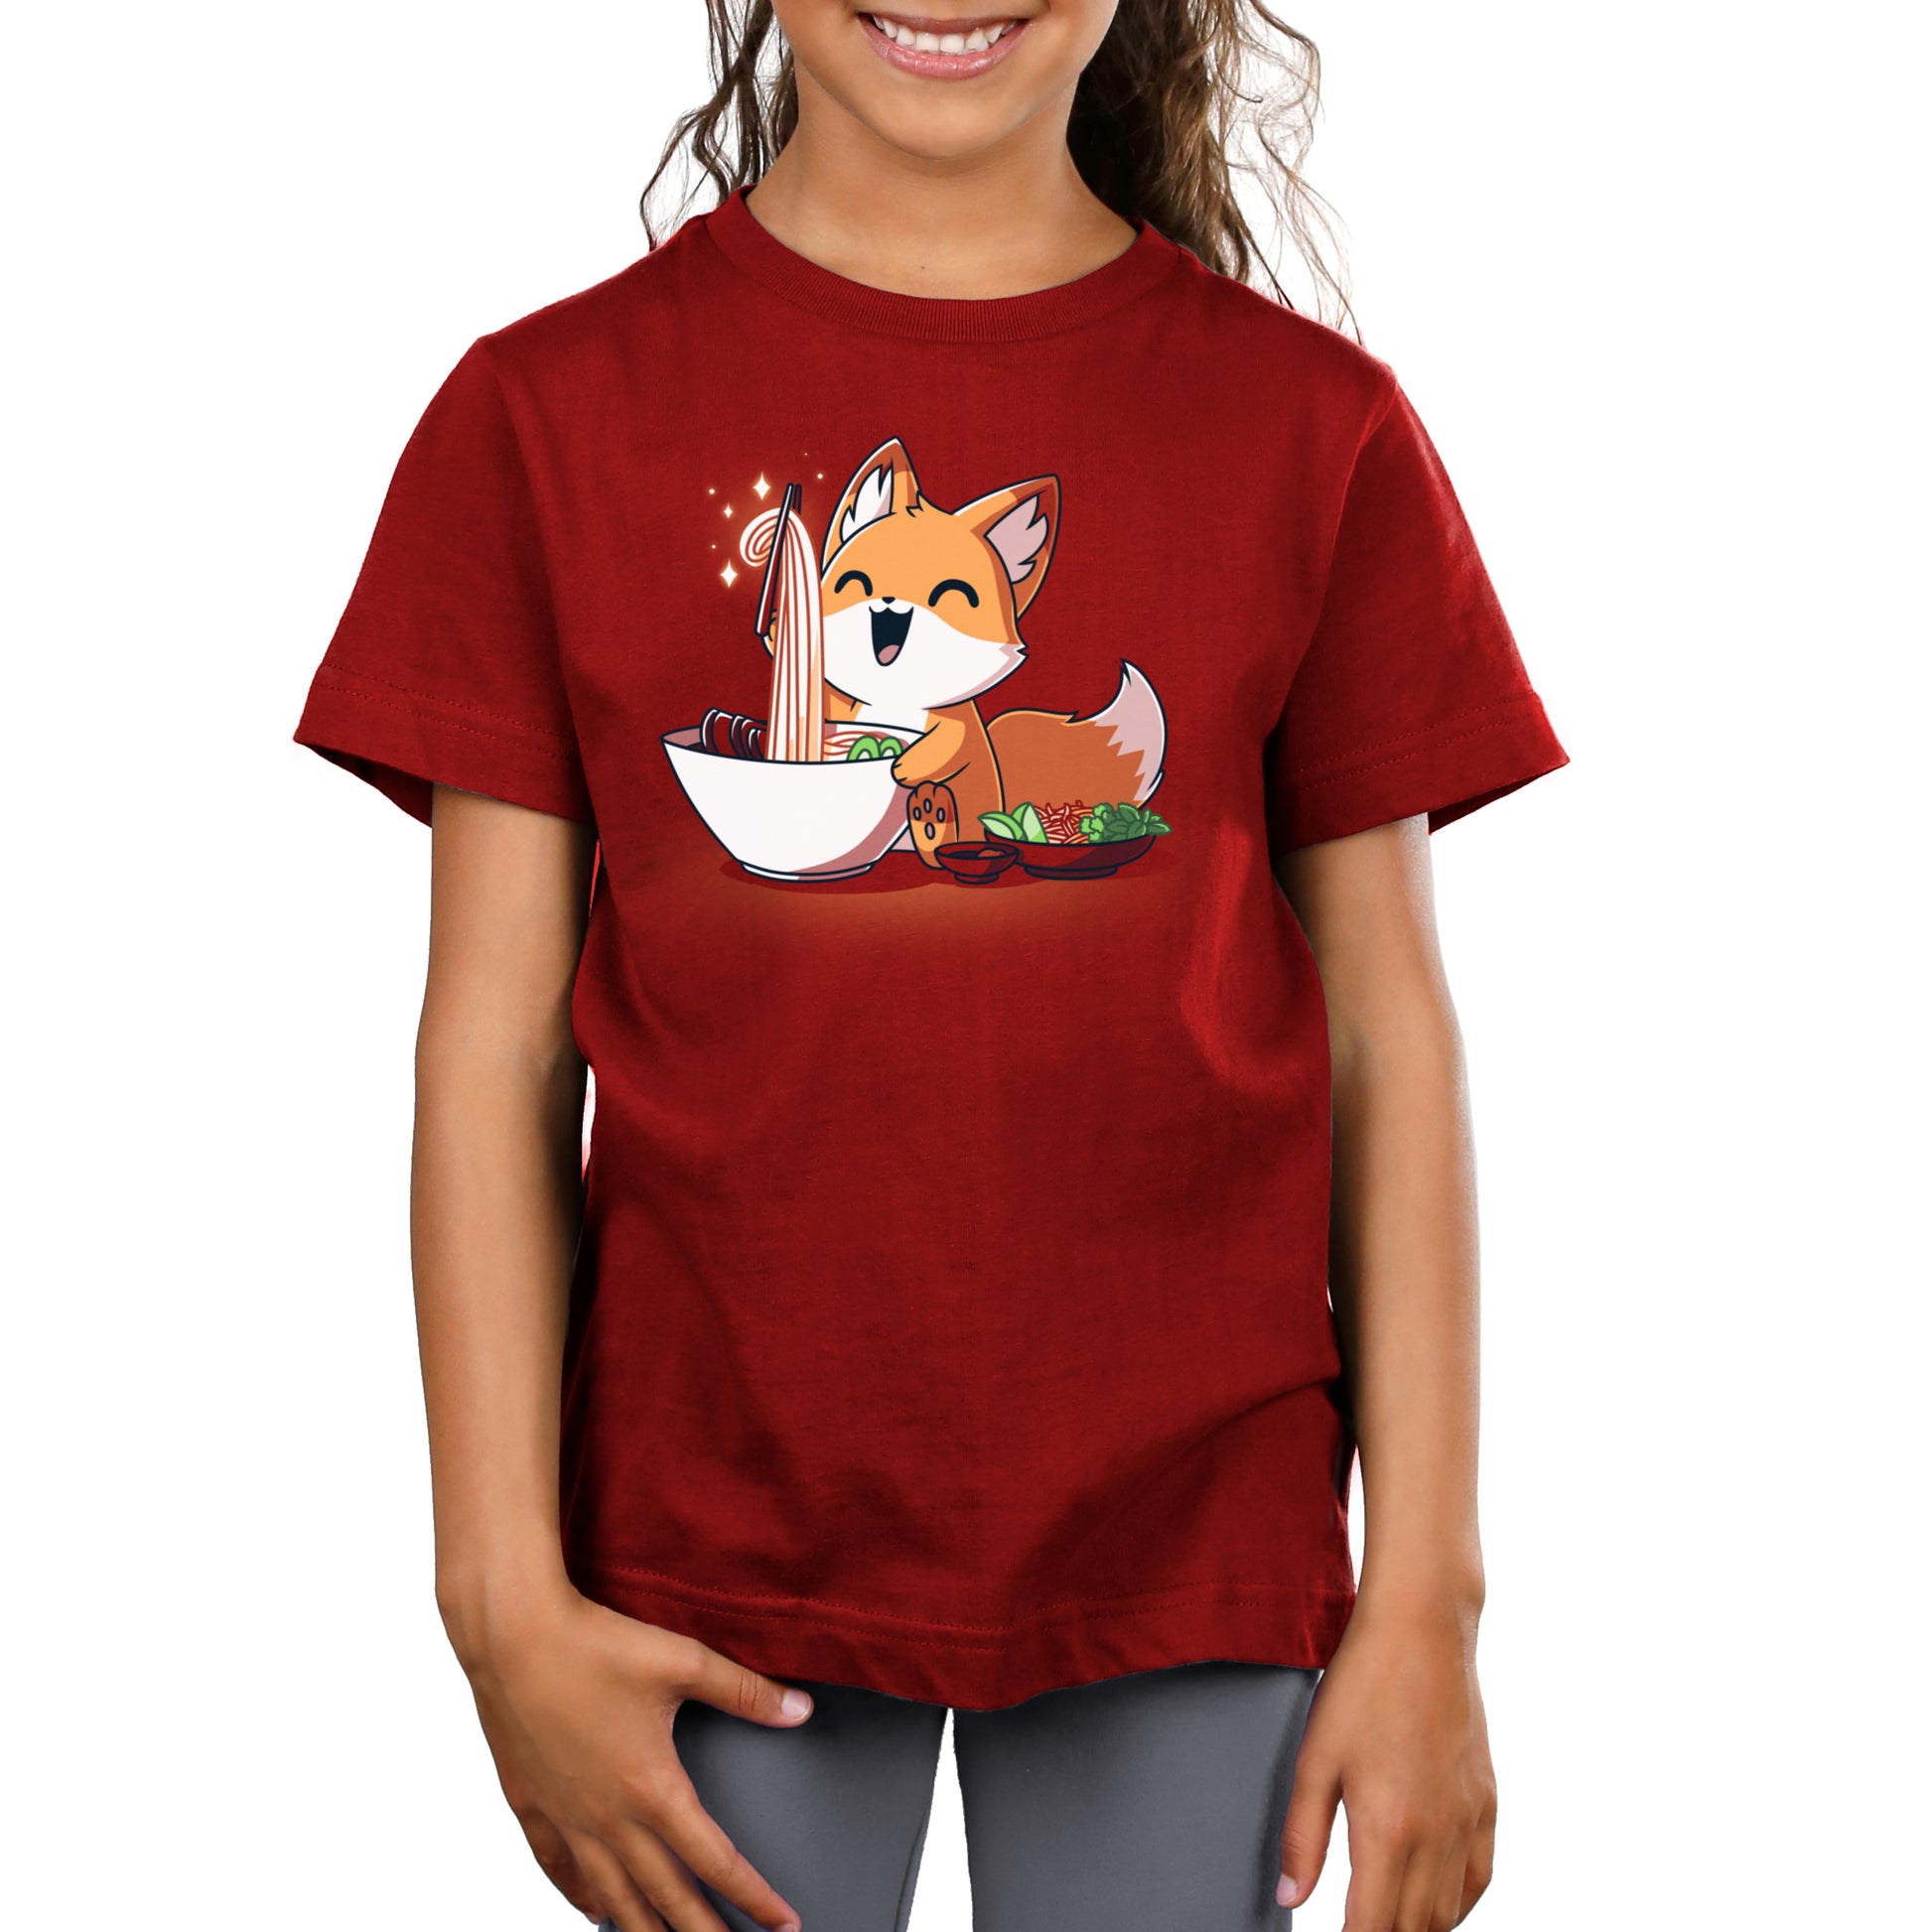 A girl wearing a red t-shirt with an image of Pho Fox in a bowl from TeeTurtle.